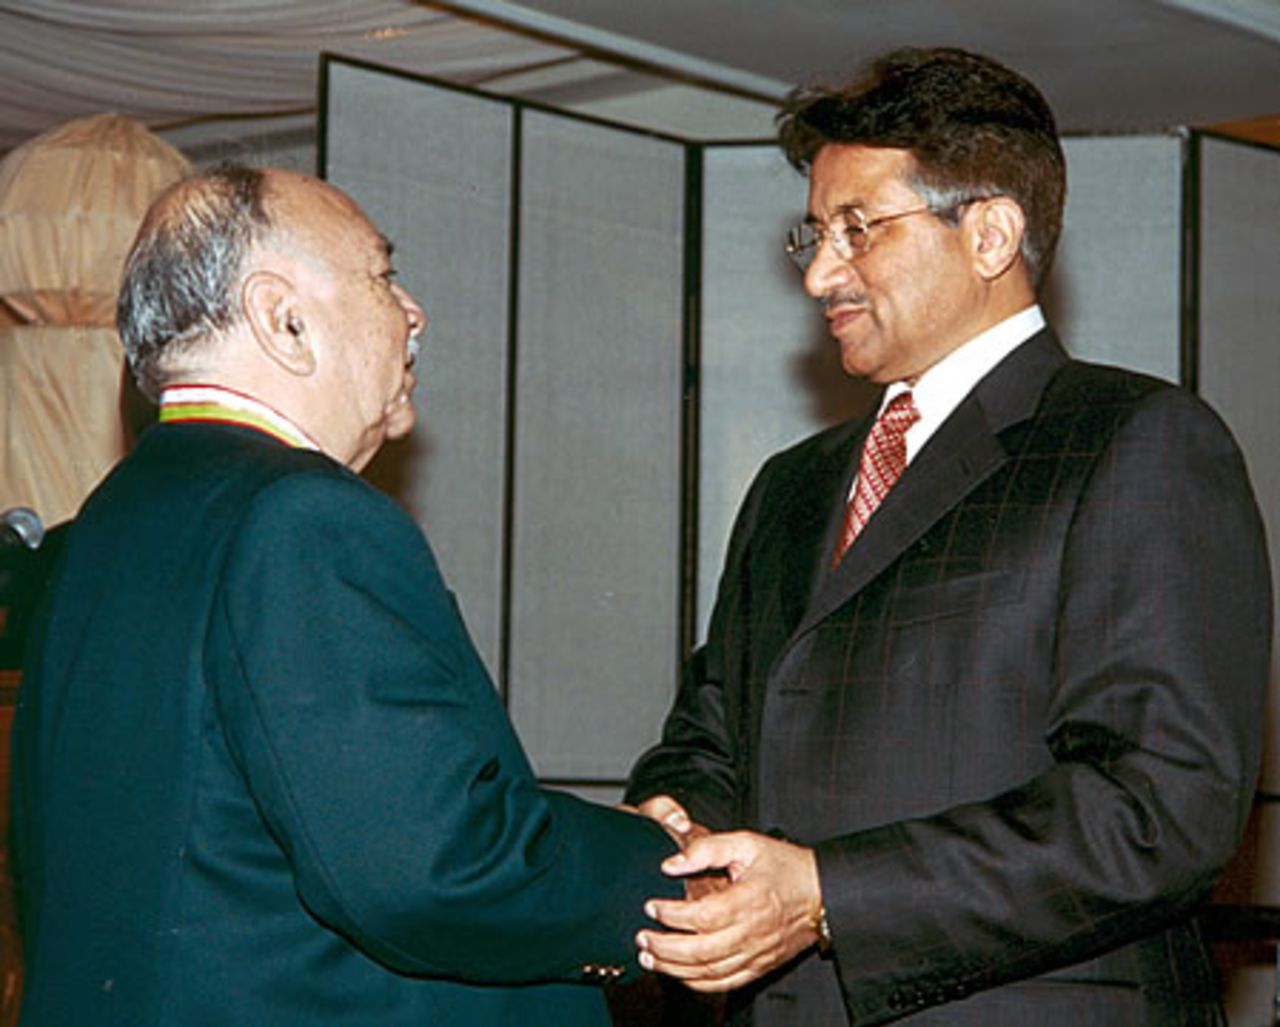 Zulfiqar Ahmed receiving his medal from Pakistan president during the Golden Jubilee of Test Cricket Gala, Islamabad, September 16, 2003.